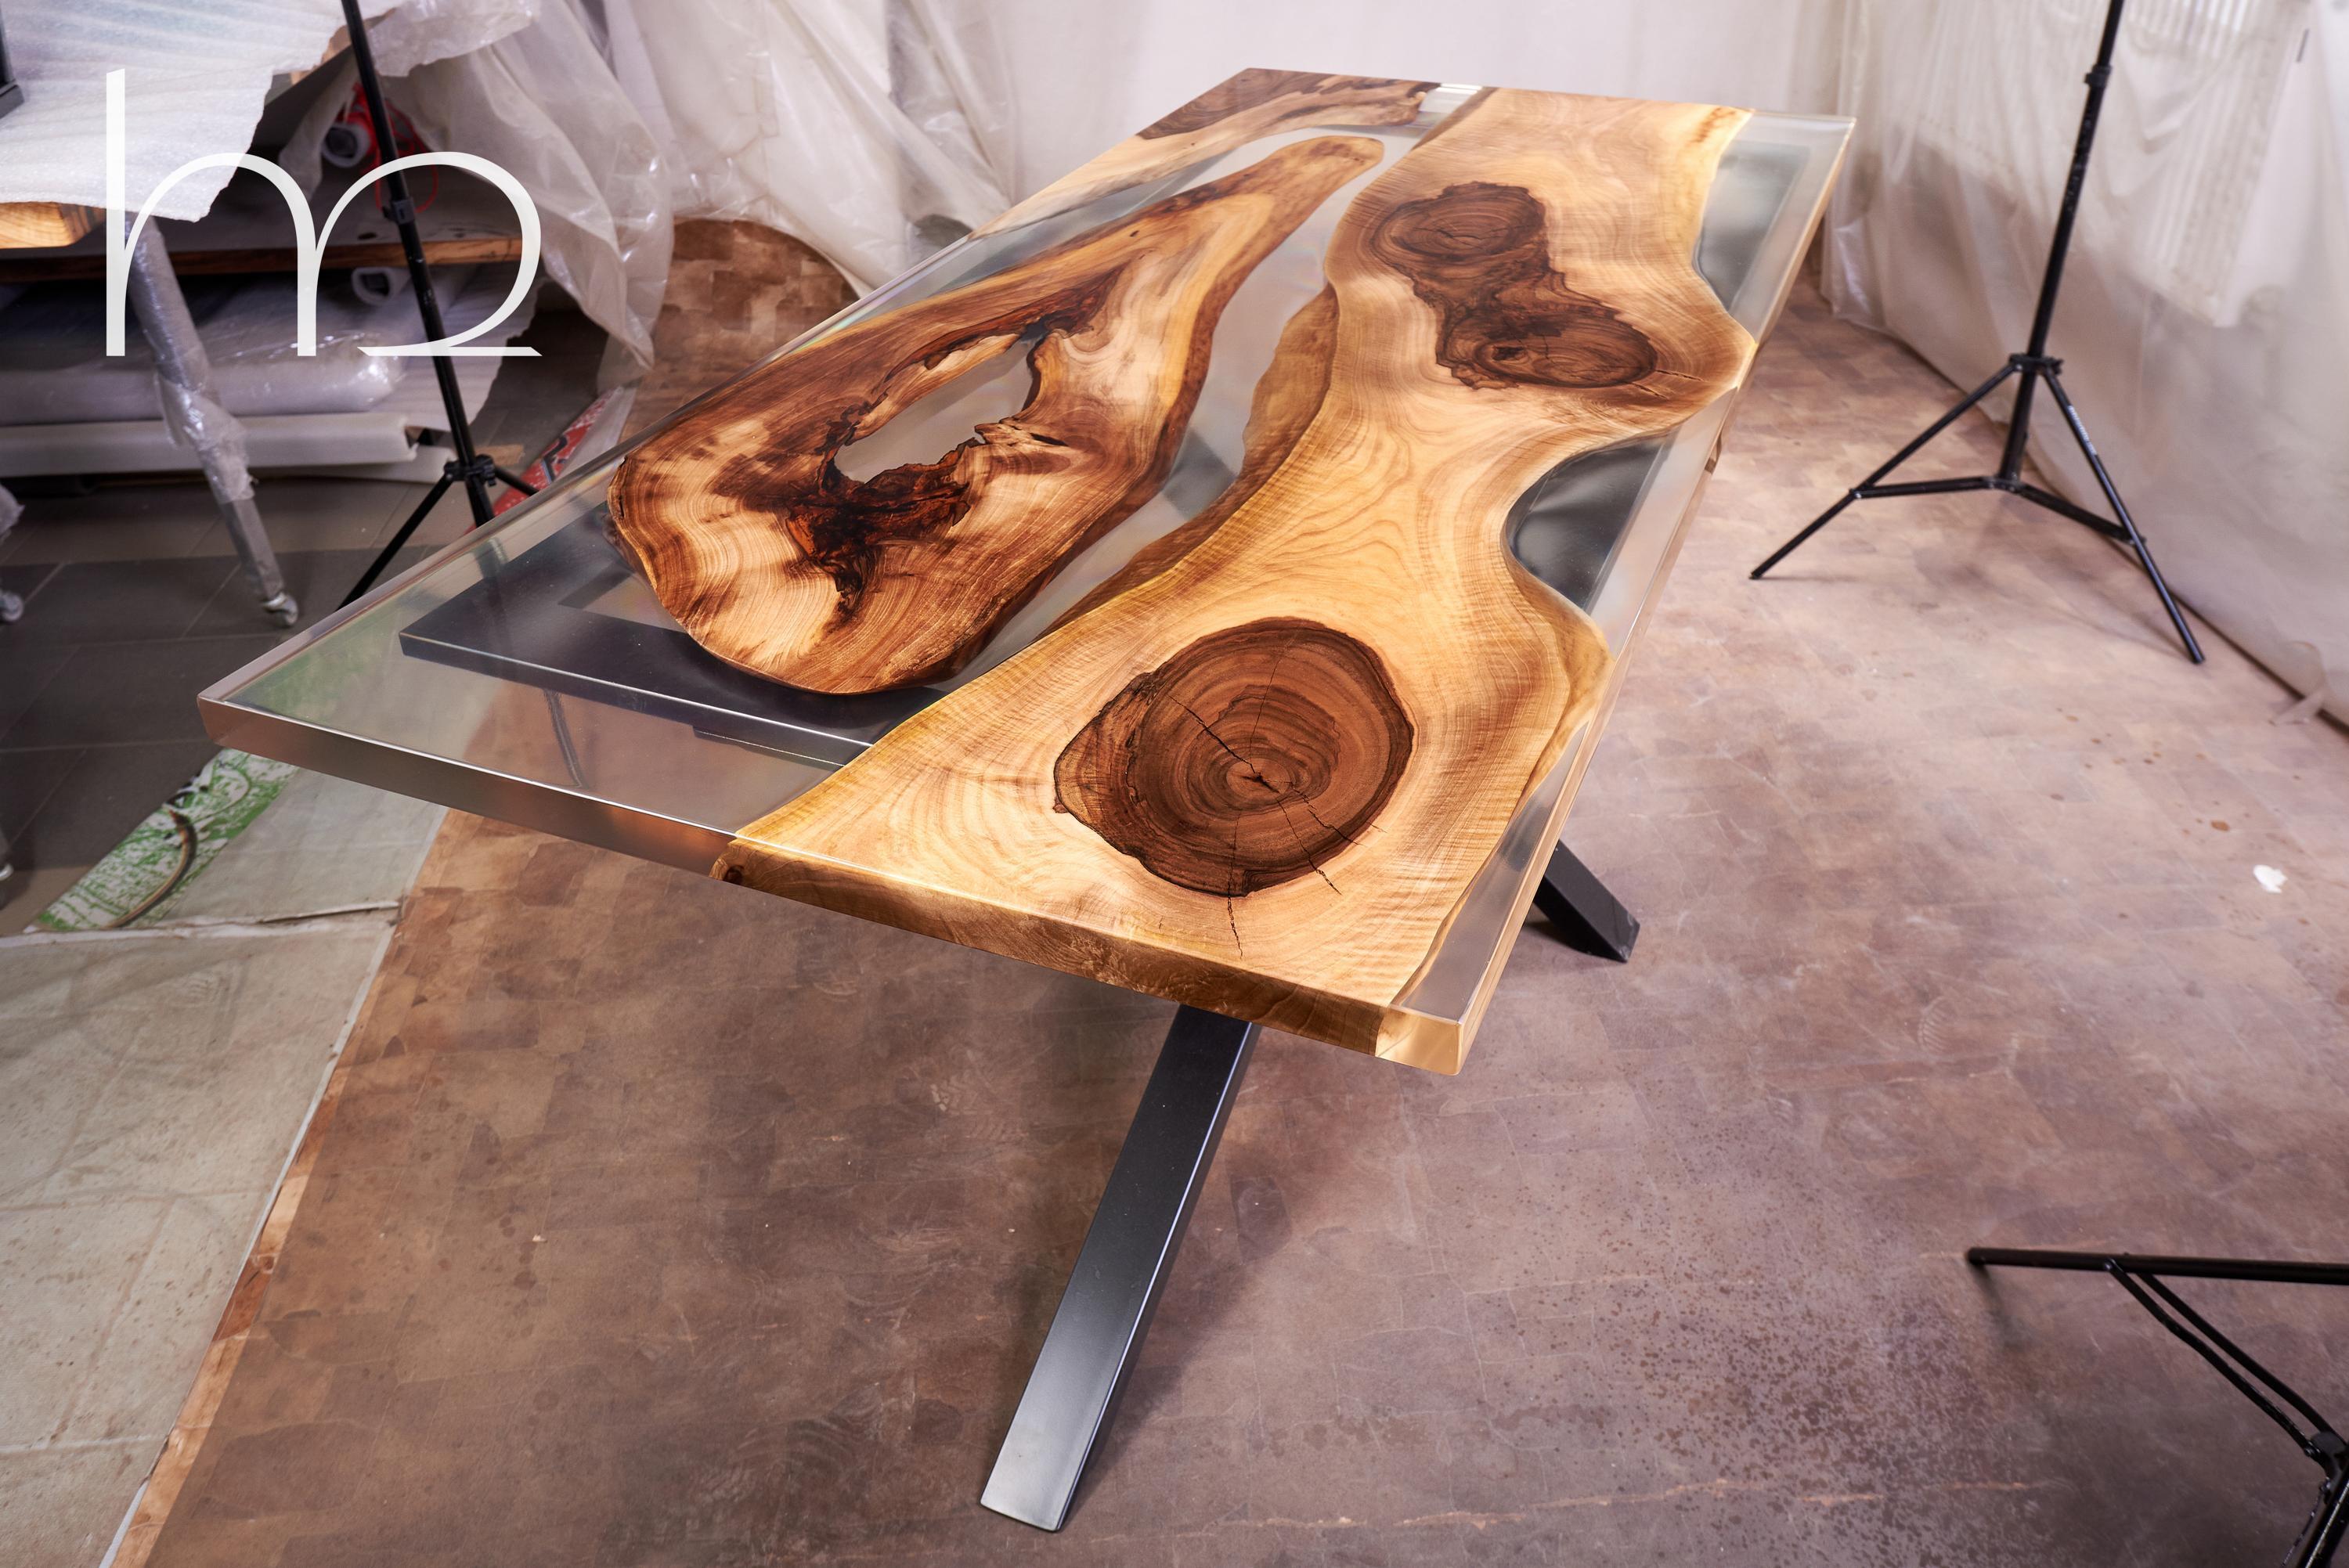 This project is an ode to the beauty of an old 100-year-old walnut tree. I left the resin clean on purpose so as not to distract from contemplating the slabs of old wood. So as not to miss a single crack, the change of color from dark to light. To